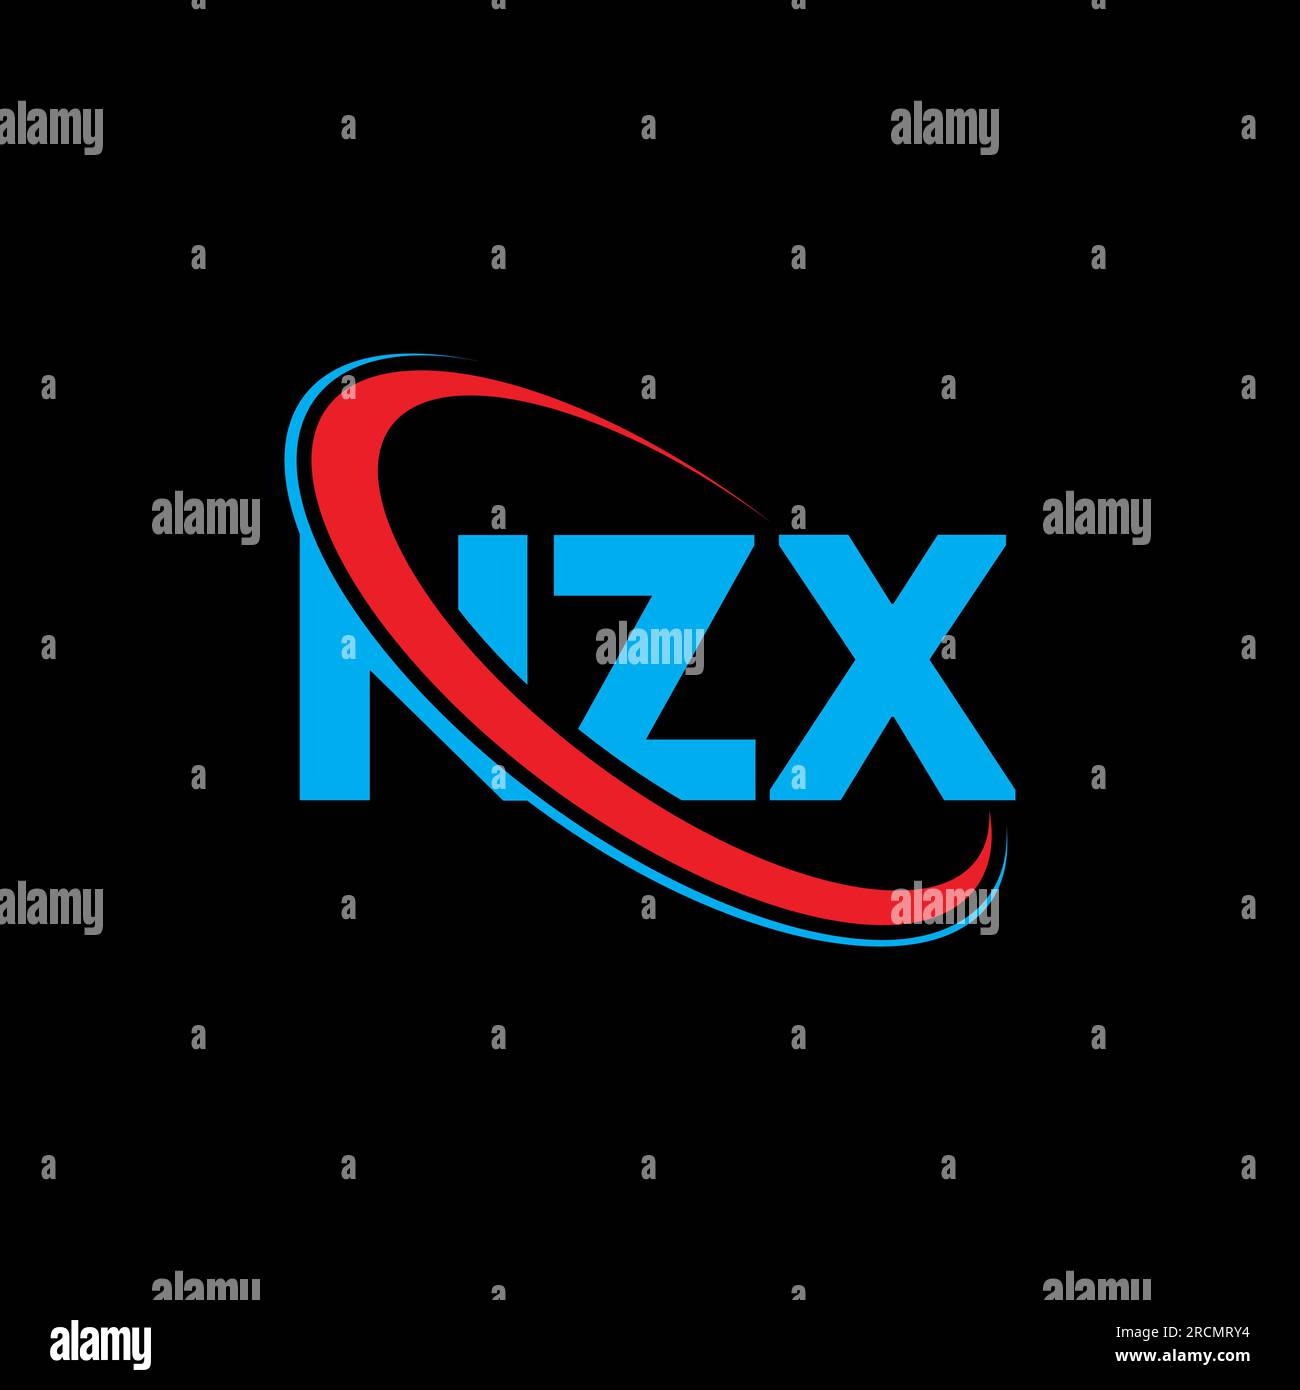 NZX logo. NZX letter. NZX letter logo design. Initials NZX logo linked with circle and uppercase monogram logo. NZX typography for technology, busines Stock Vector